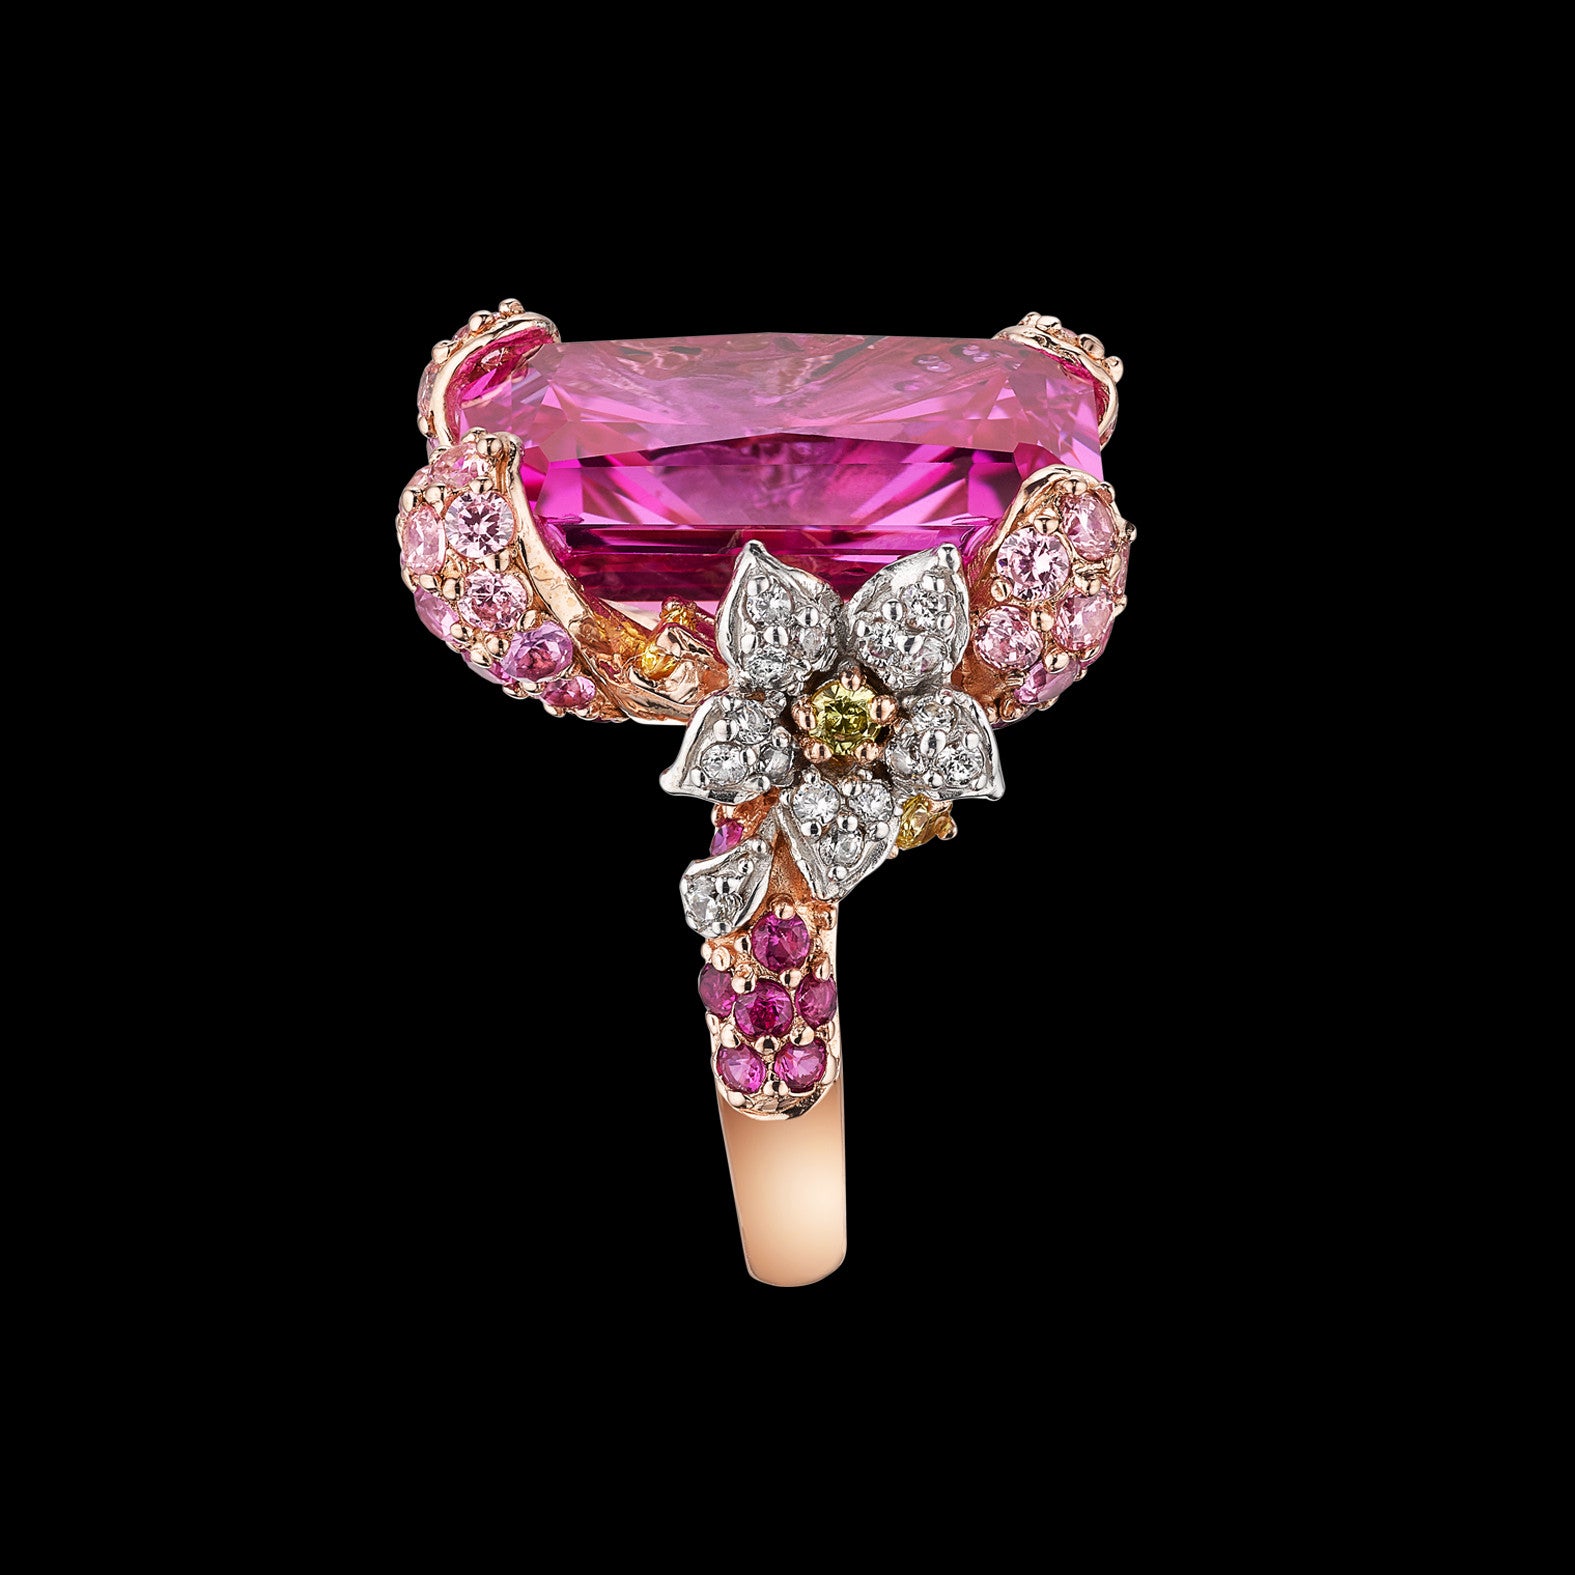 Rose Cinderella Ring, Ring, Anabela Chan Joaillerie - Fine jewelry with laboratory grown and created gemstones hand-crafted in the United Kingdom. Anabela Chan Joaillerie is the first fine jewellery brand in the world to champion laboratory-grown and created gemstones with high jewellery design, artisanal craftsmanship and a focus on ethical and sustainable innovations.